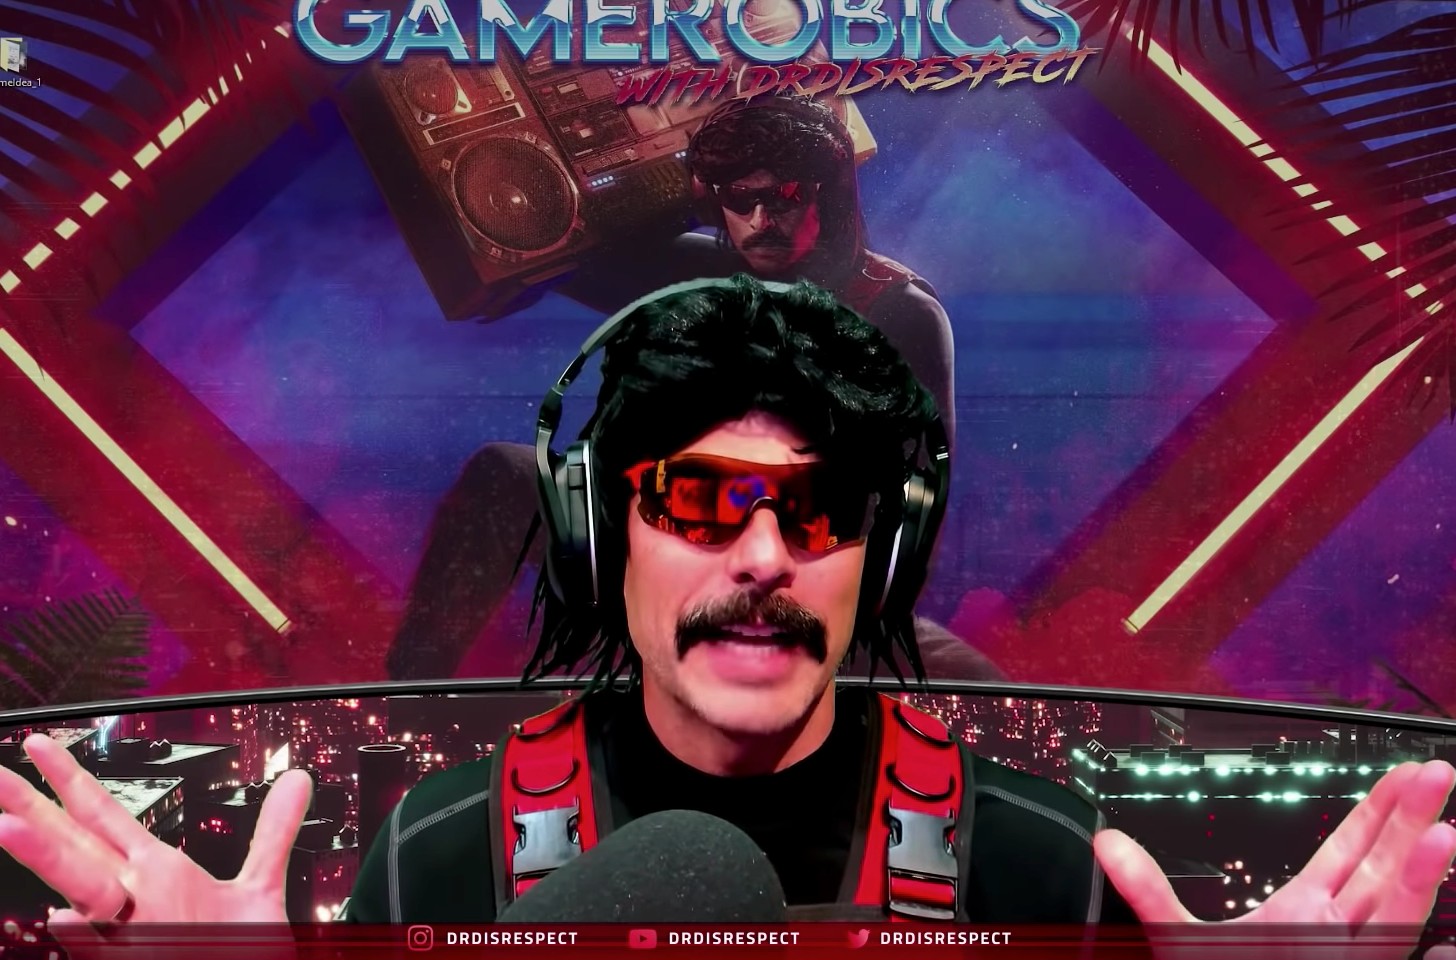 Dr Disrespect with his hands raised during a livestream.